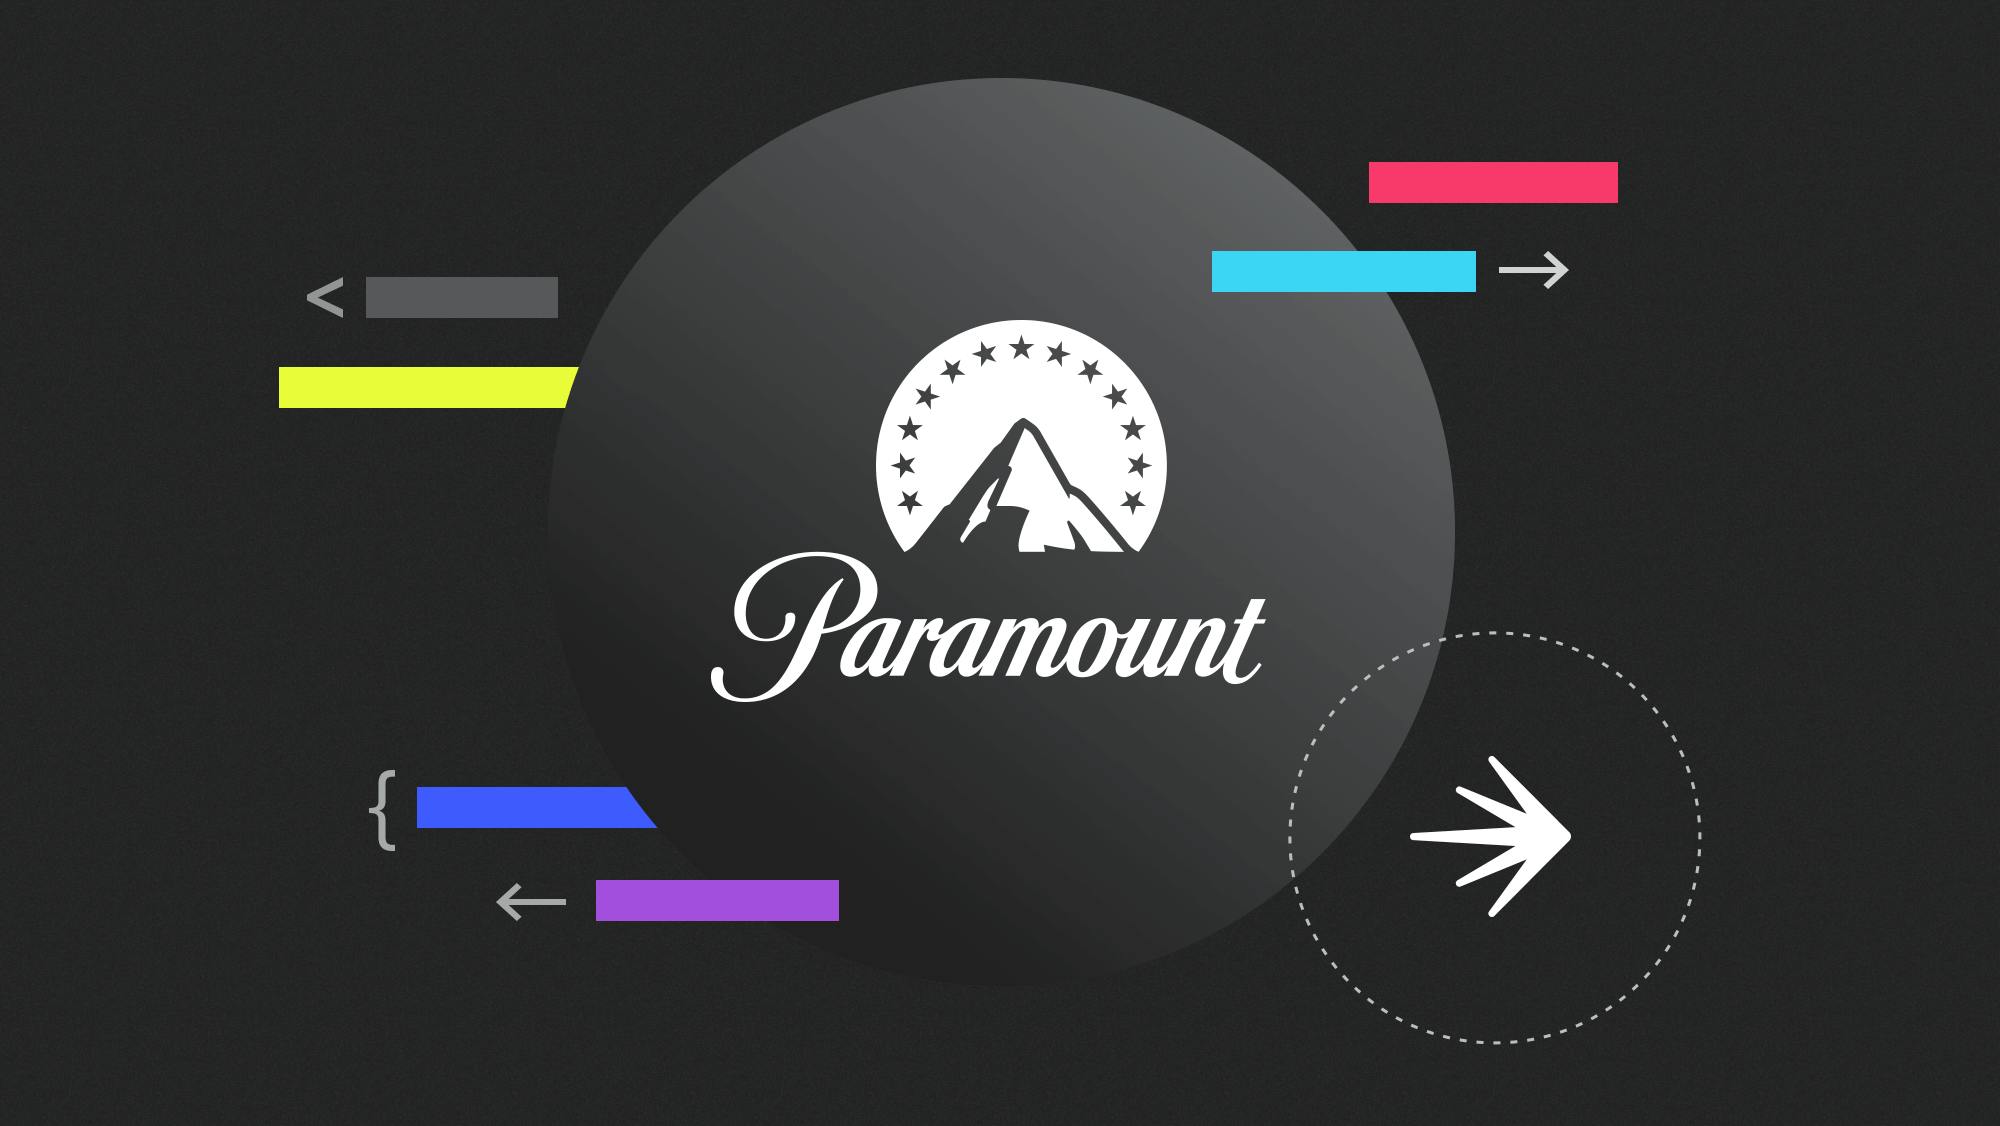 Paramount Improves Developer Productivity 100X With LaunchDarkly  featured image